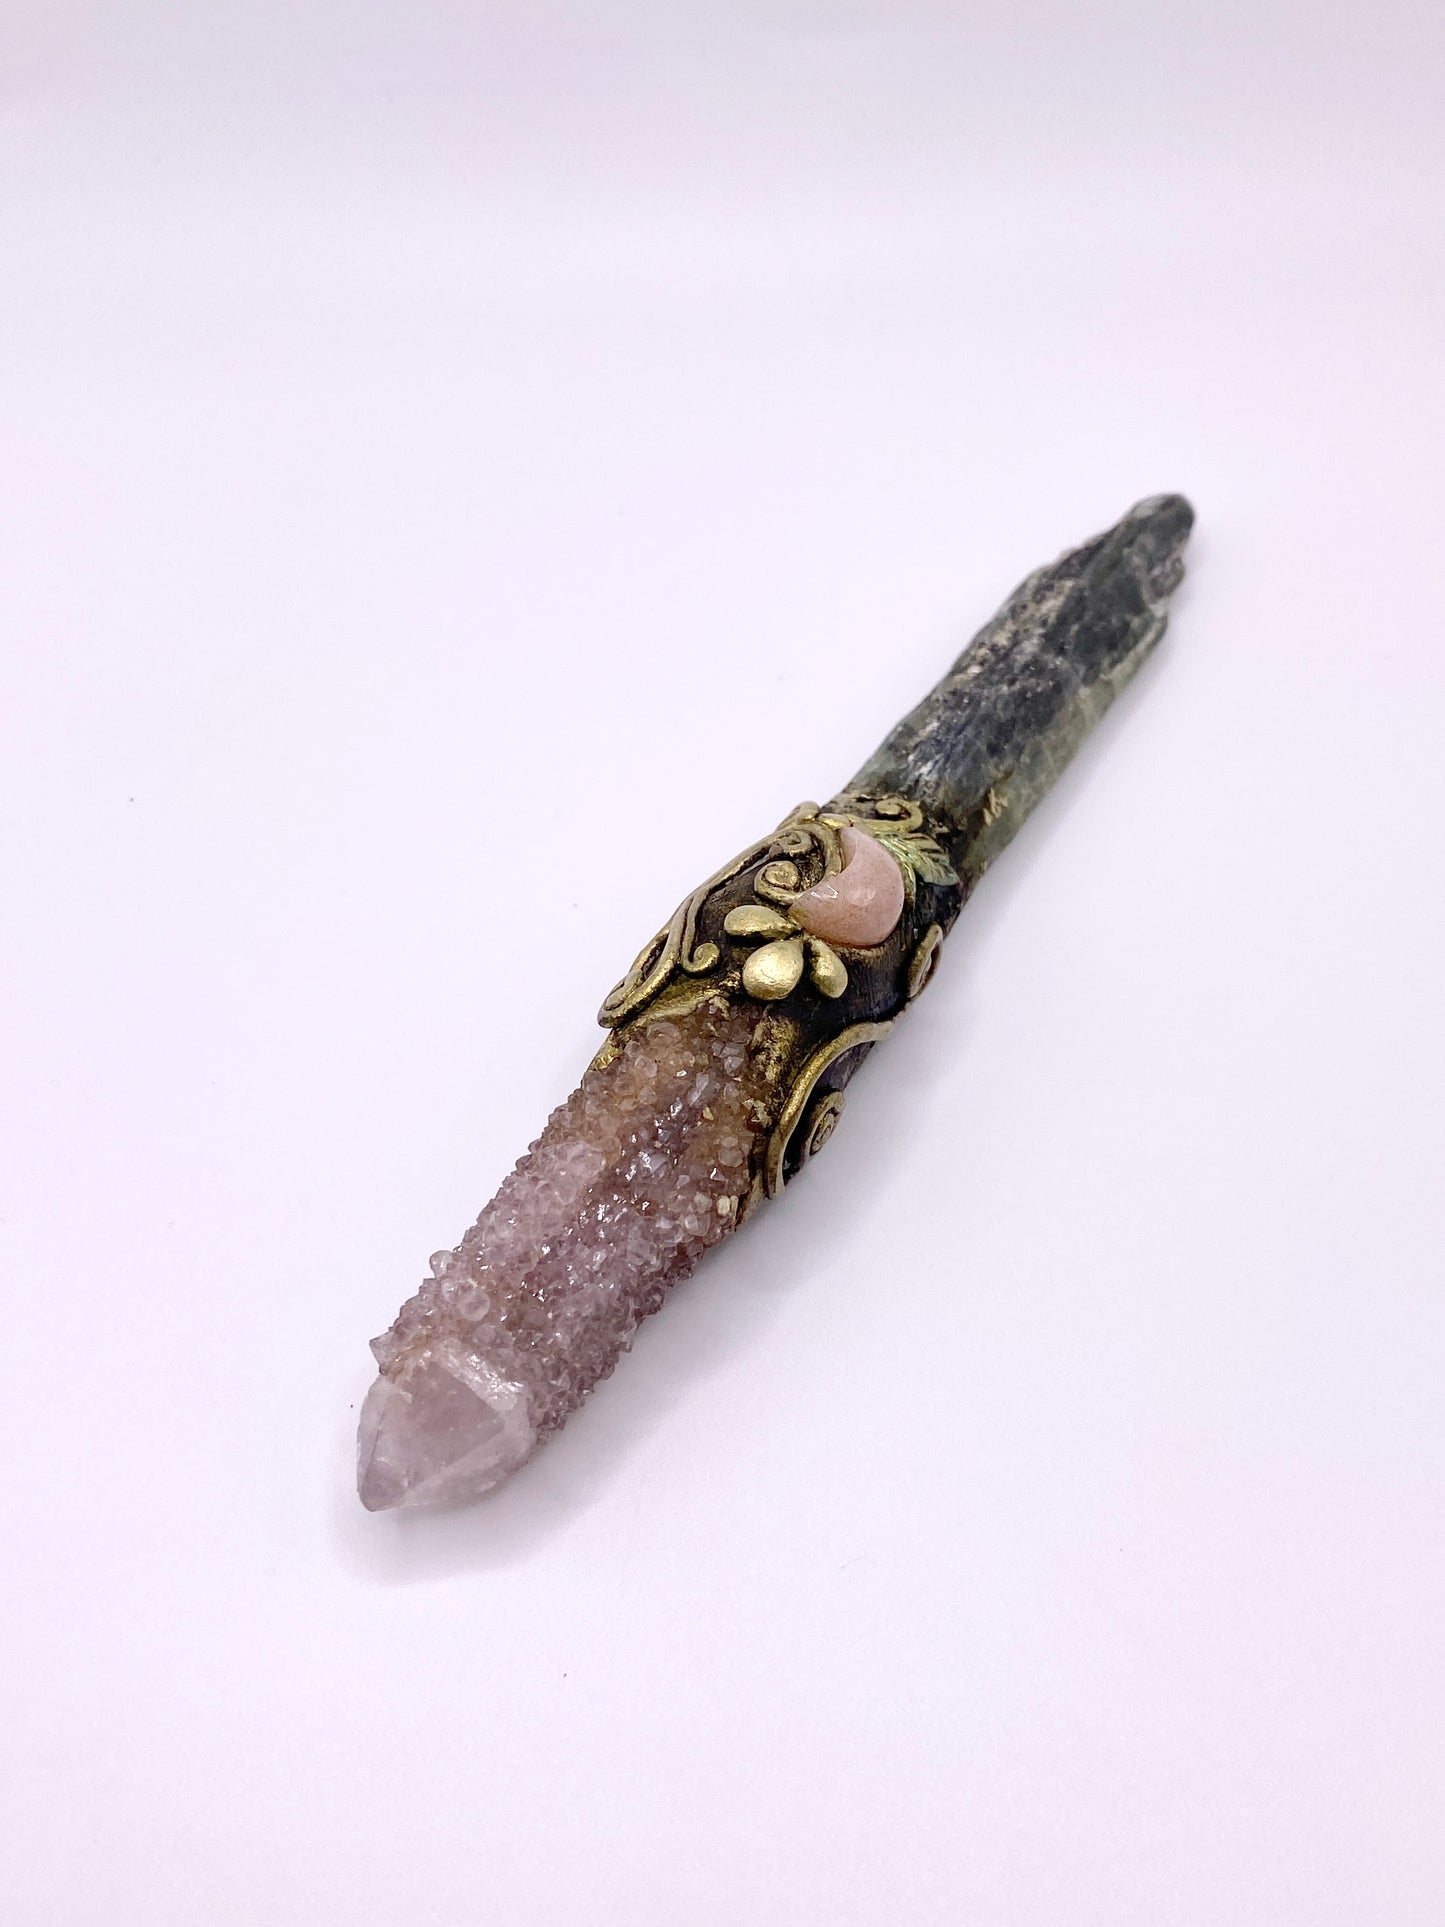 Crystal Energy Wand with Amethyst Spirit Quartz, Green Kyanite and Peach Moonstone Crescent - Reversible Metaphysical Wand